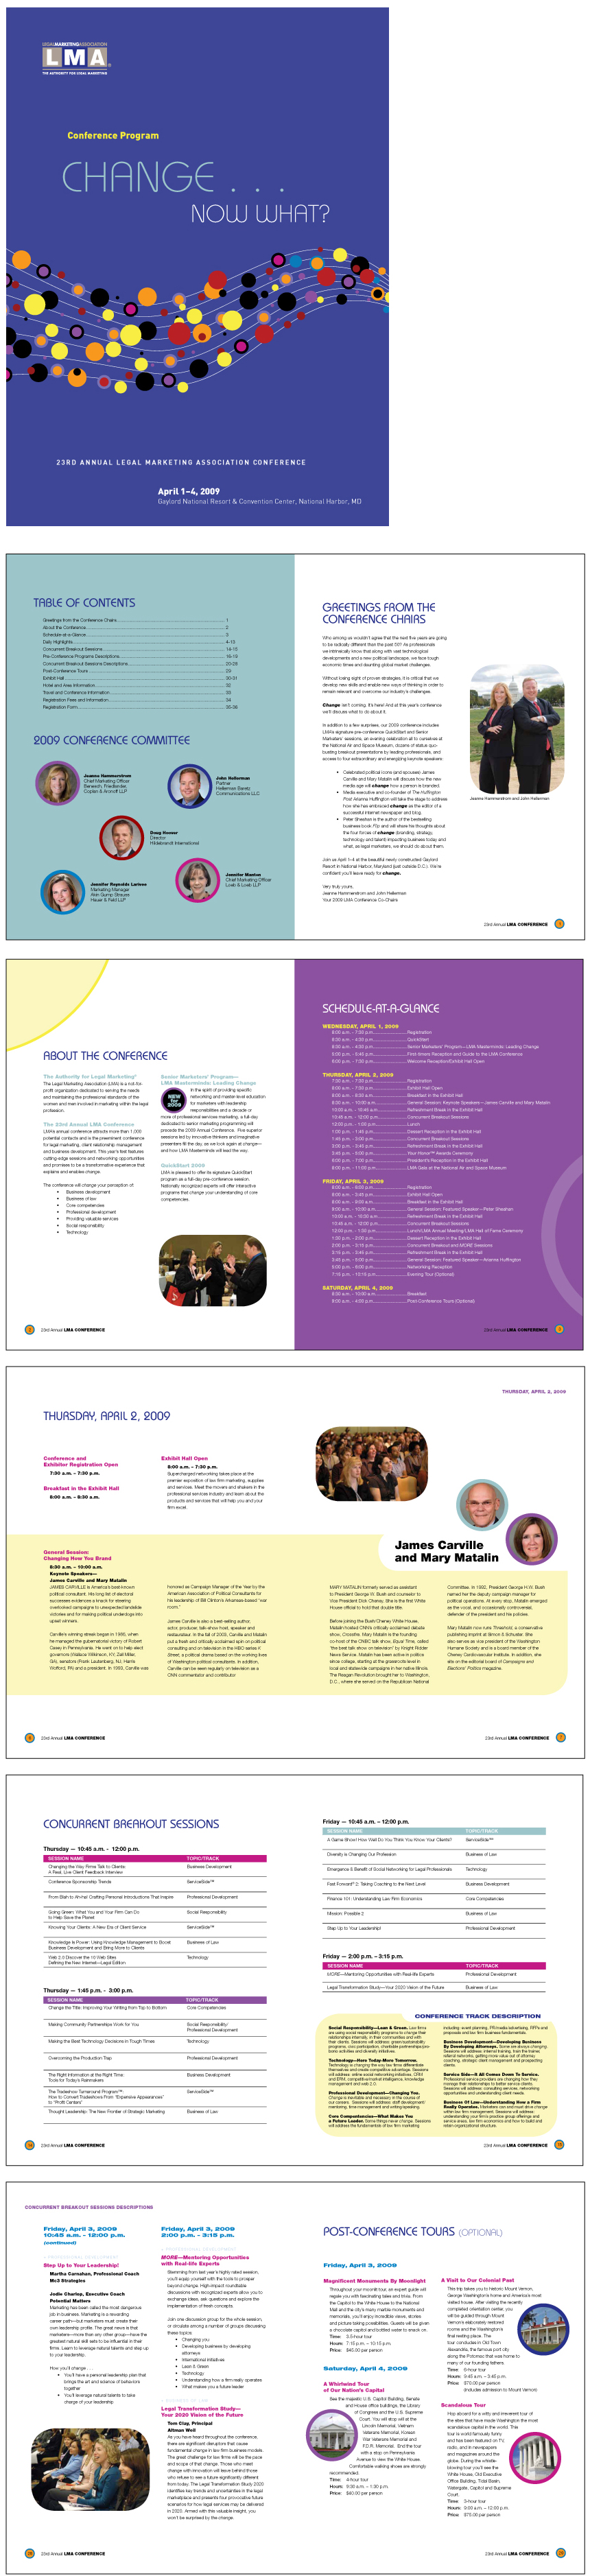 LMA Conference Brochure Layout